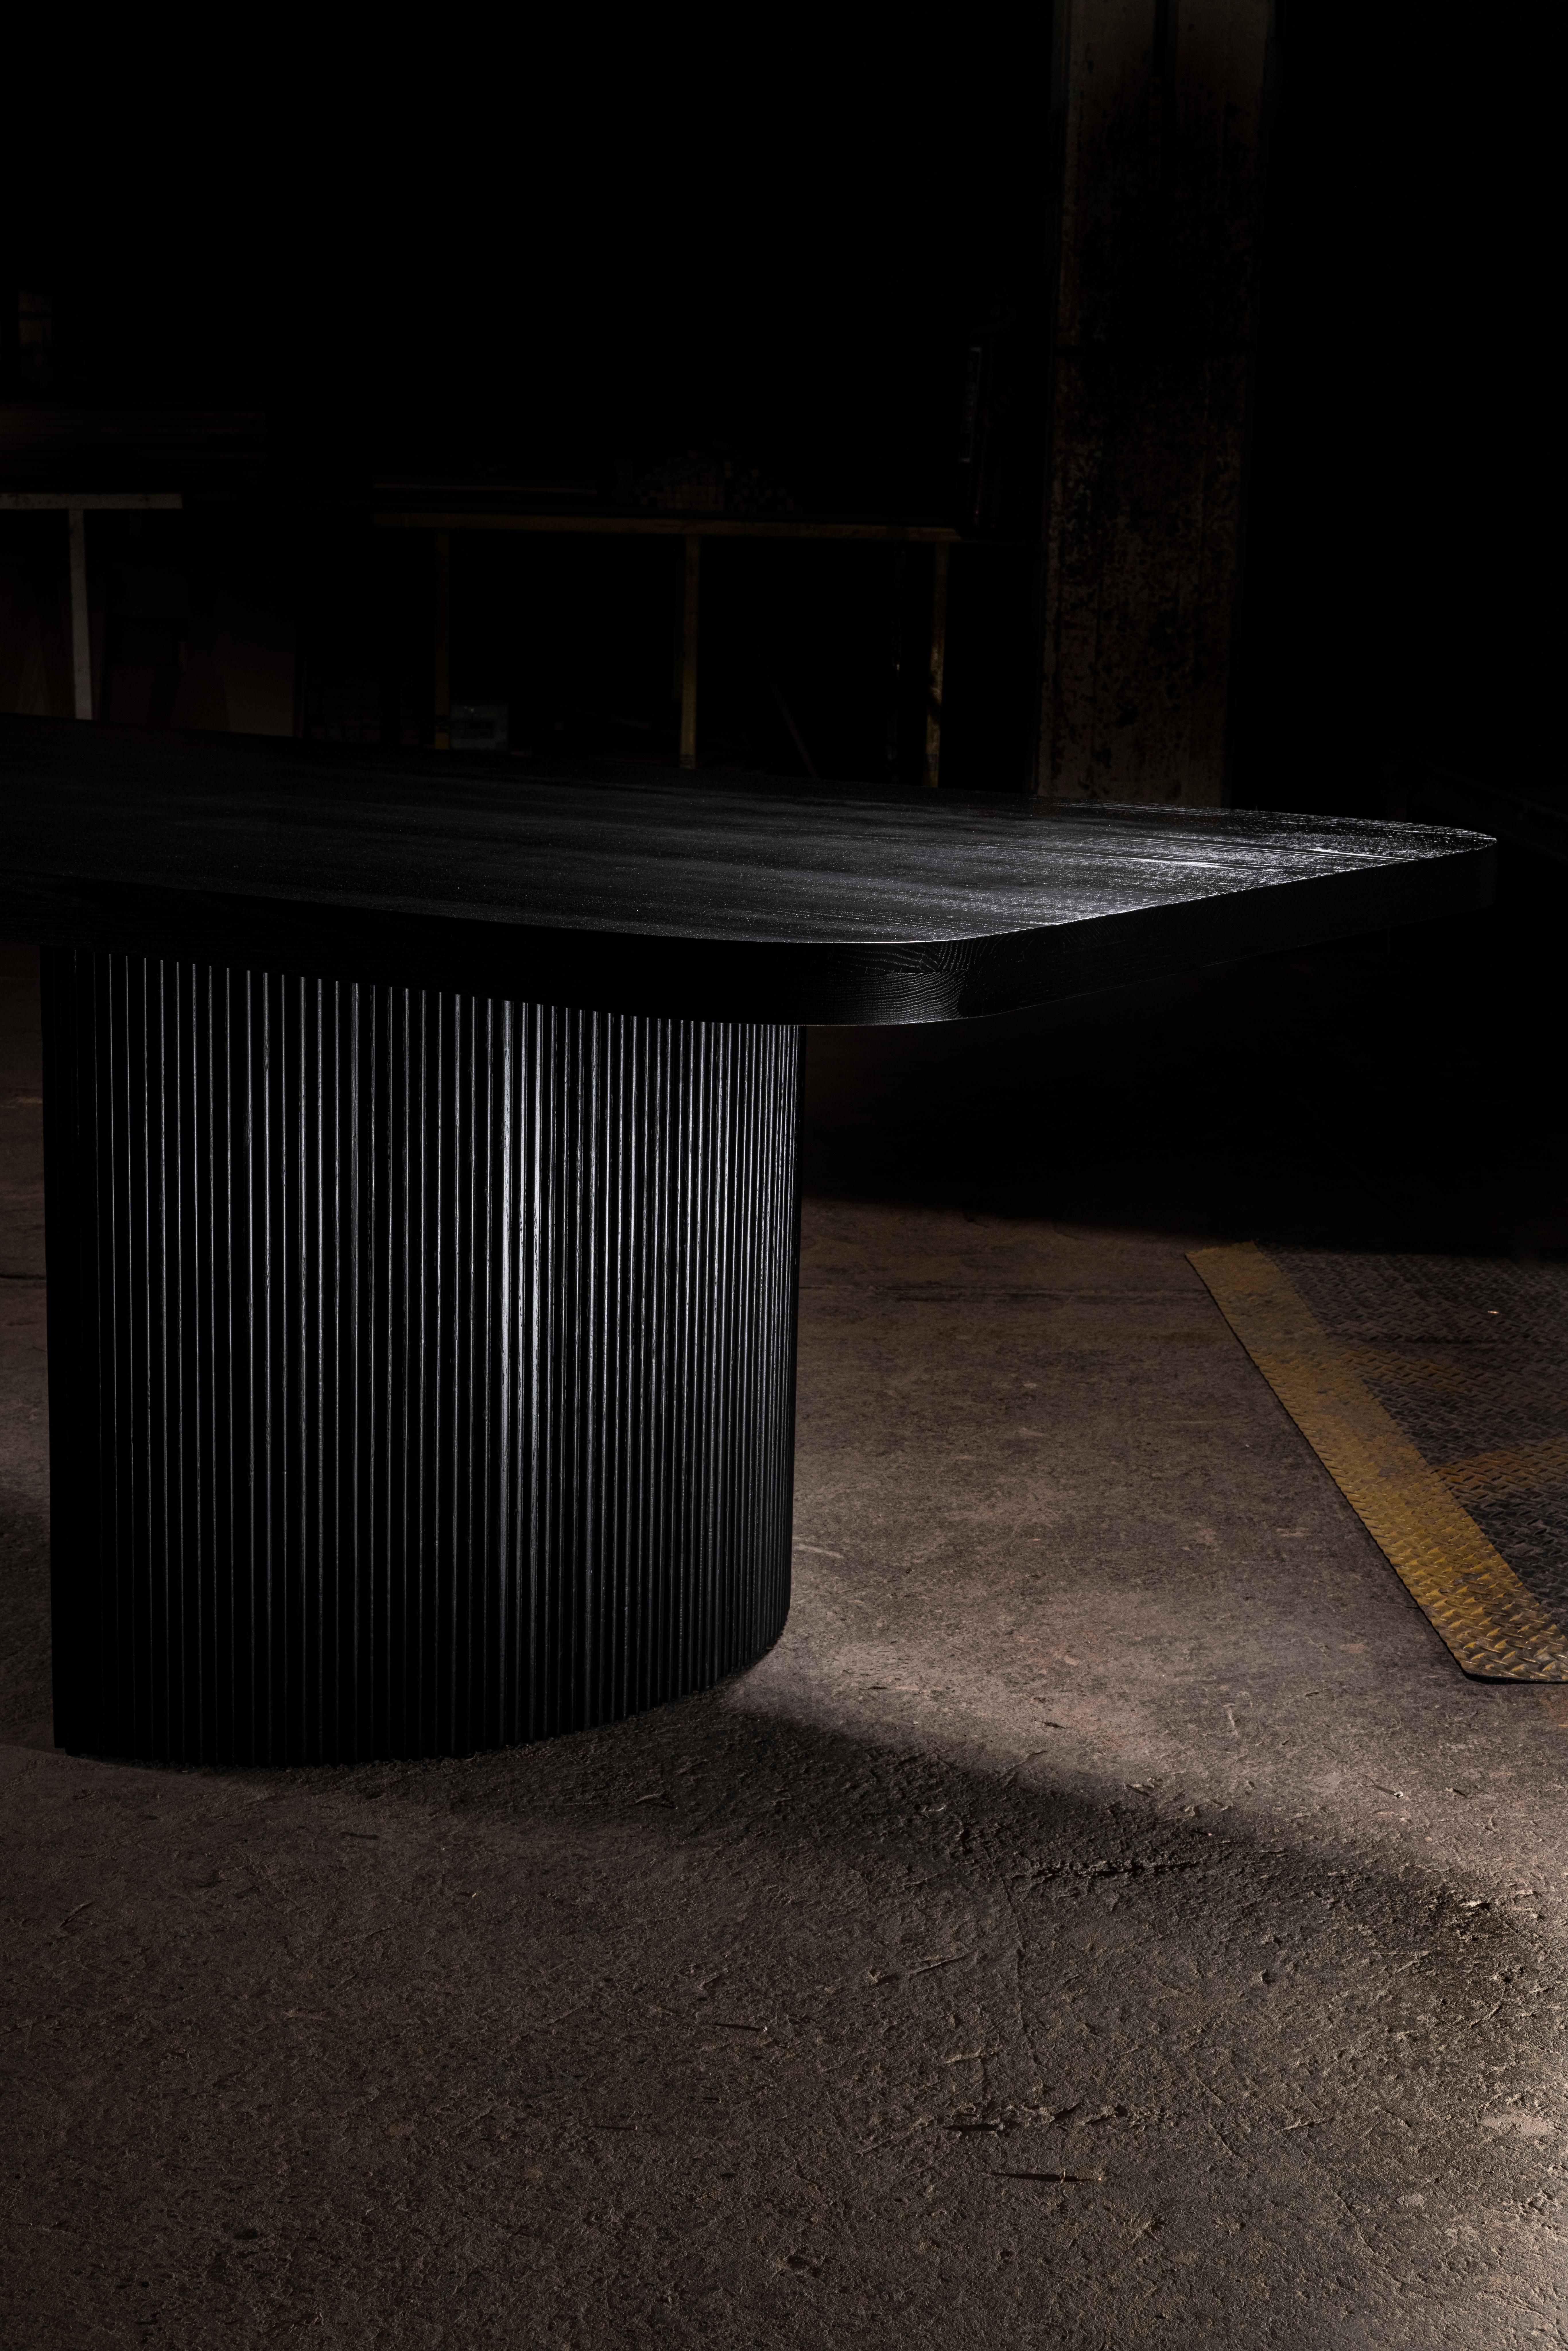 Black oak dining table with rounded corners, pedestals are half circle with fluted wood detail.